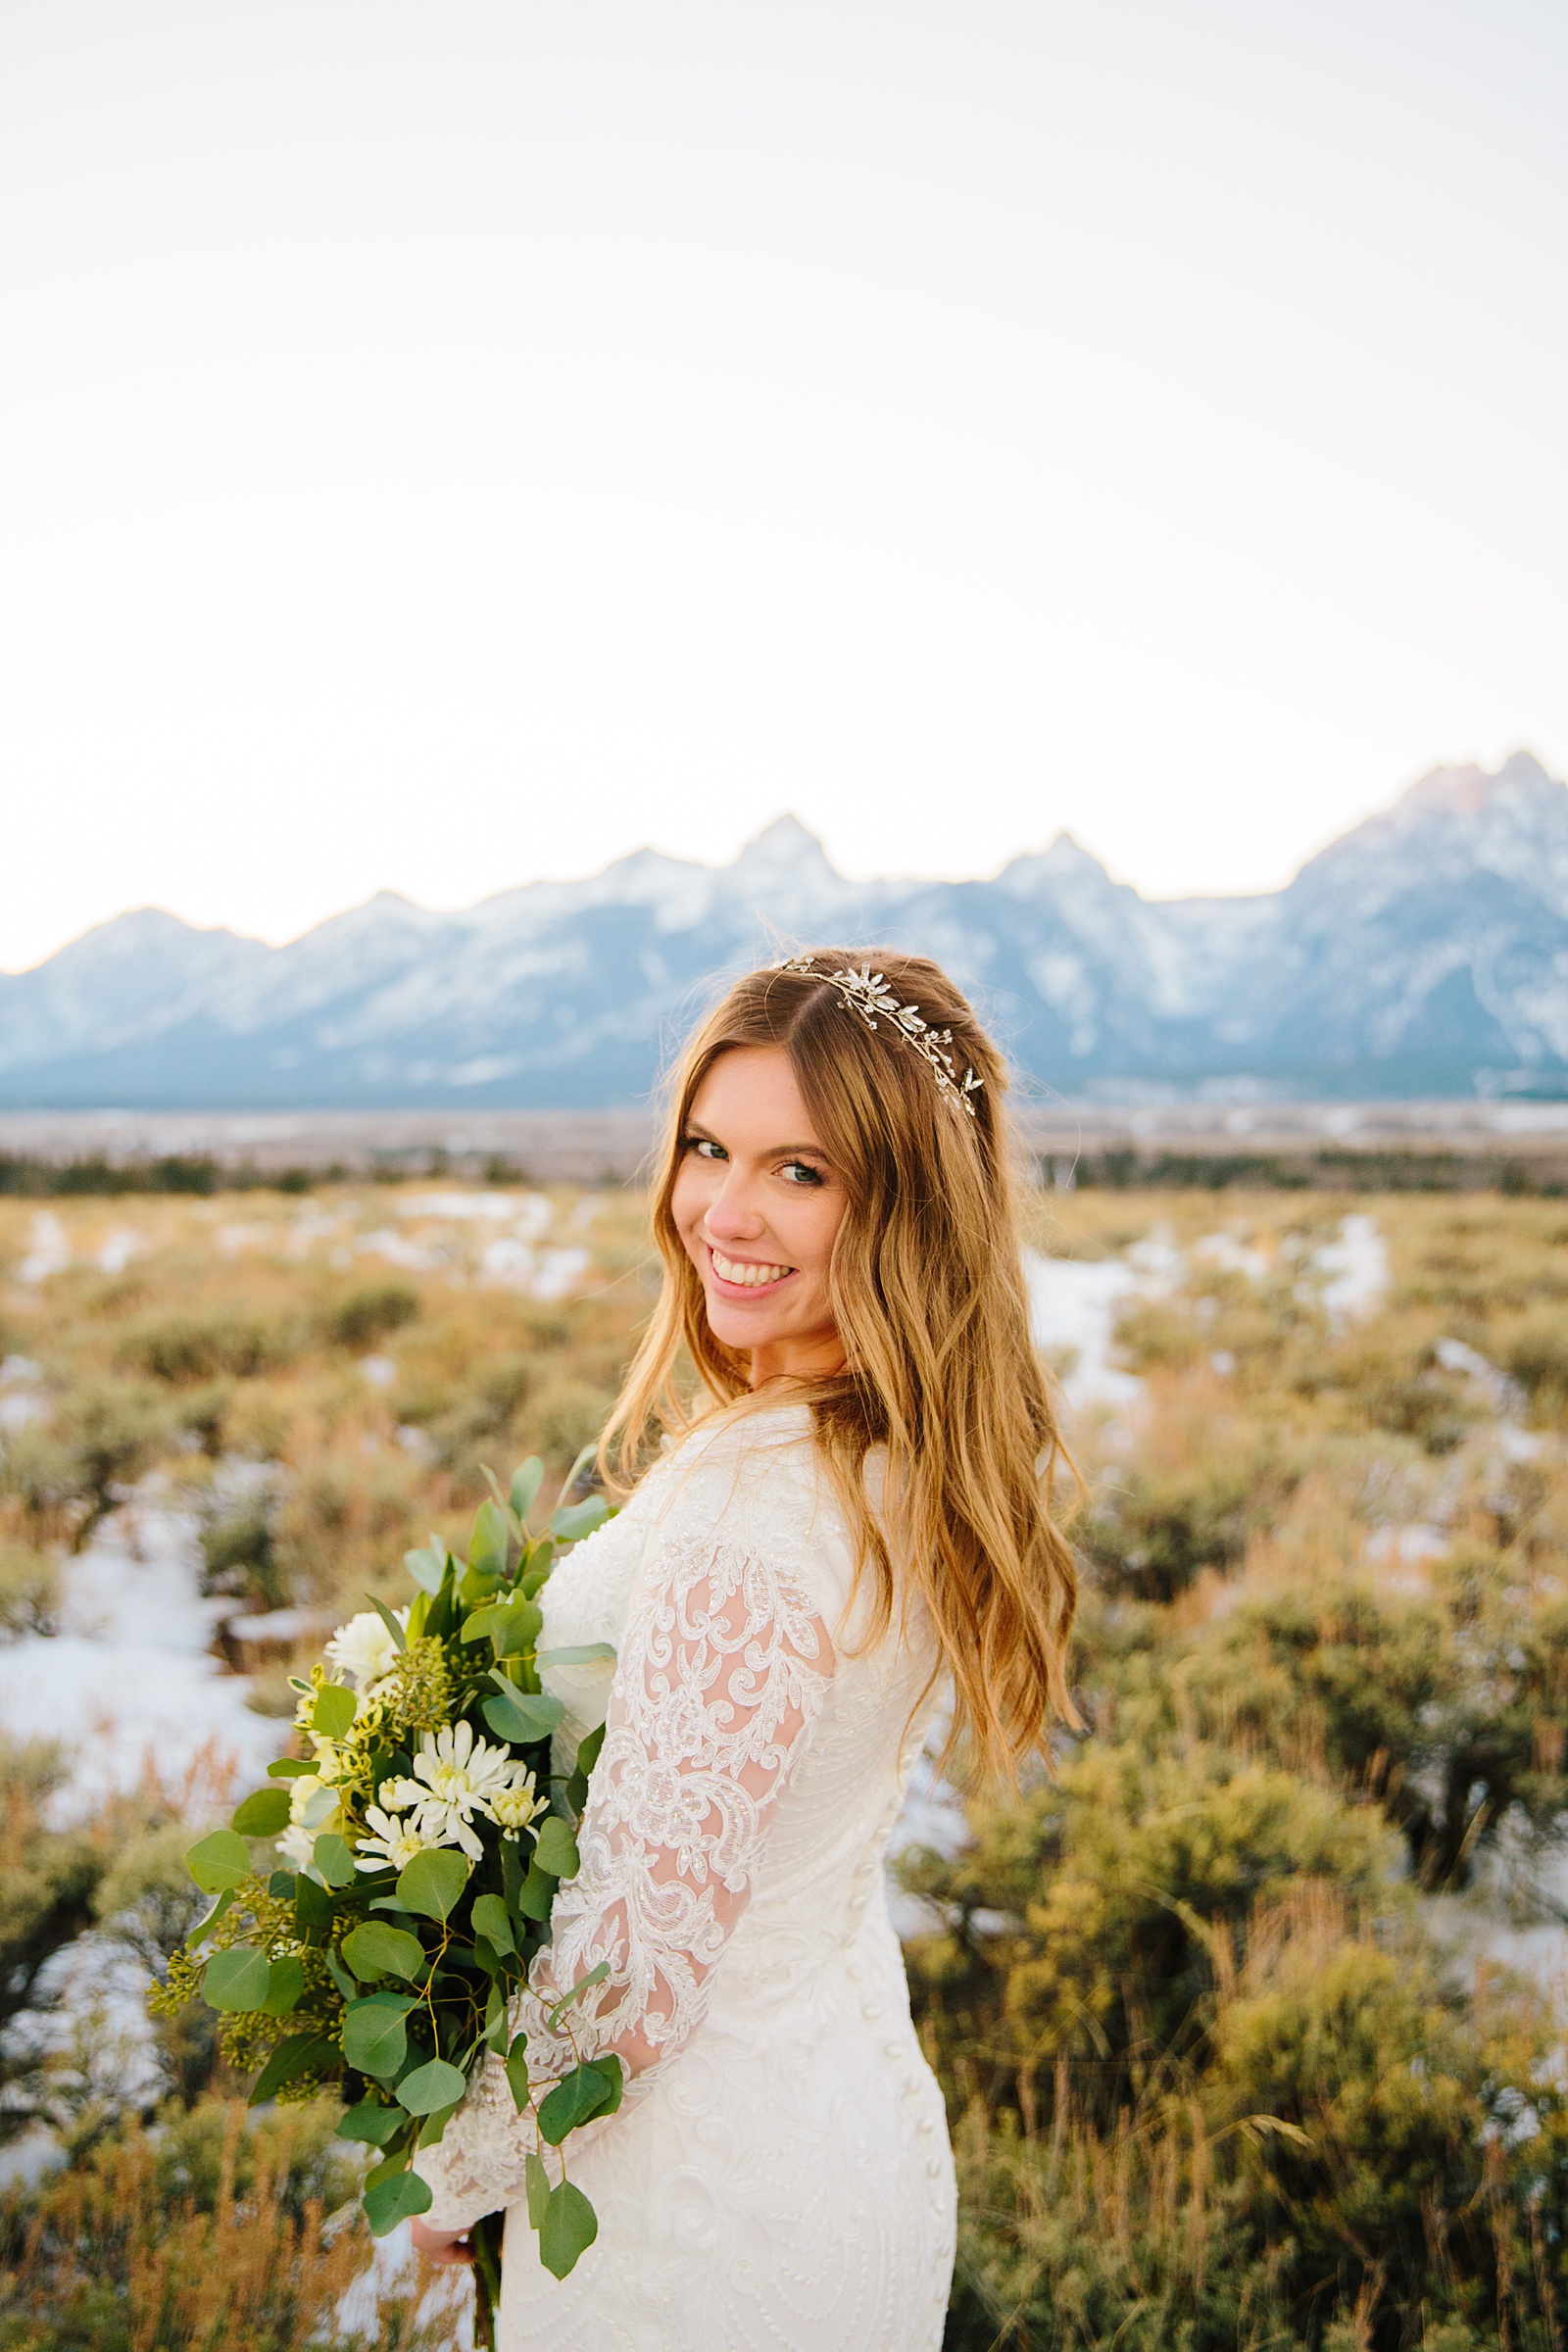 Pocatello Idaho wedding photos with bride in a lace wedding dress holding a white floral and greenery bouquet while smiling over her shoulder